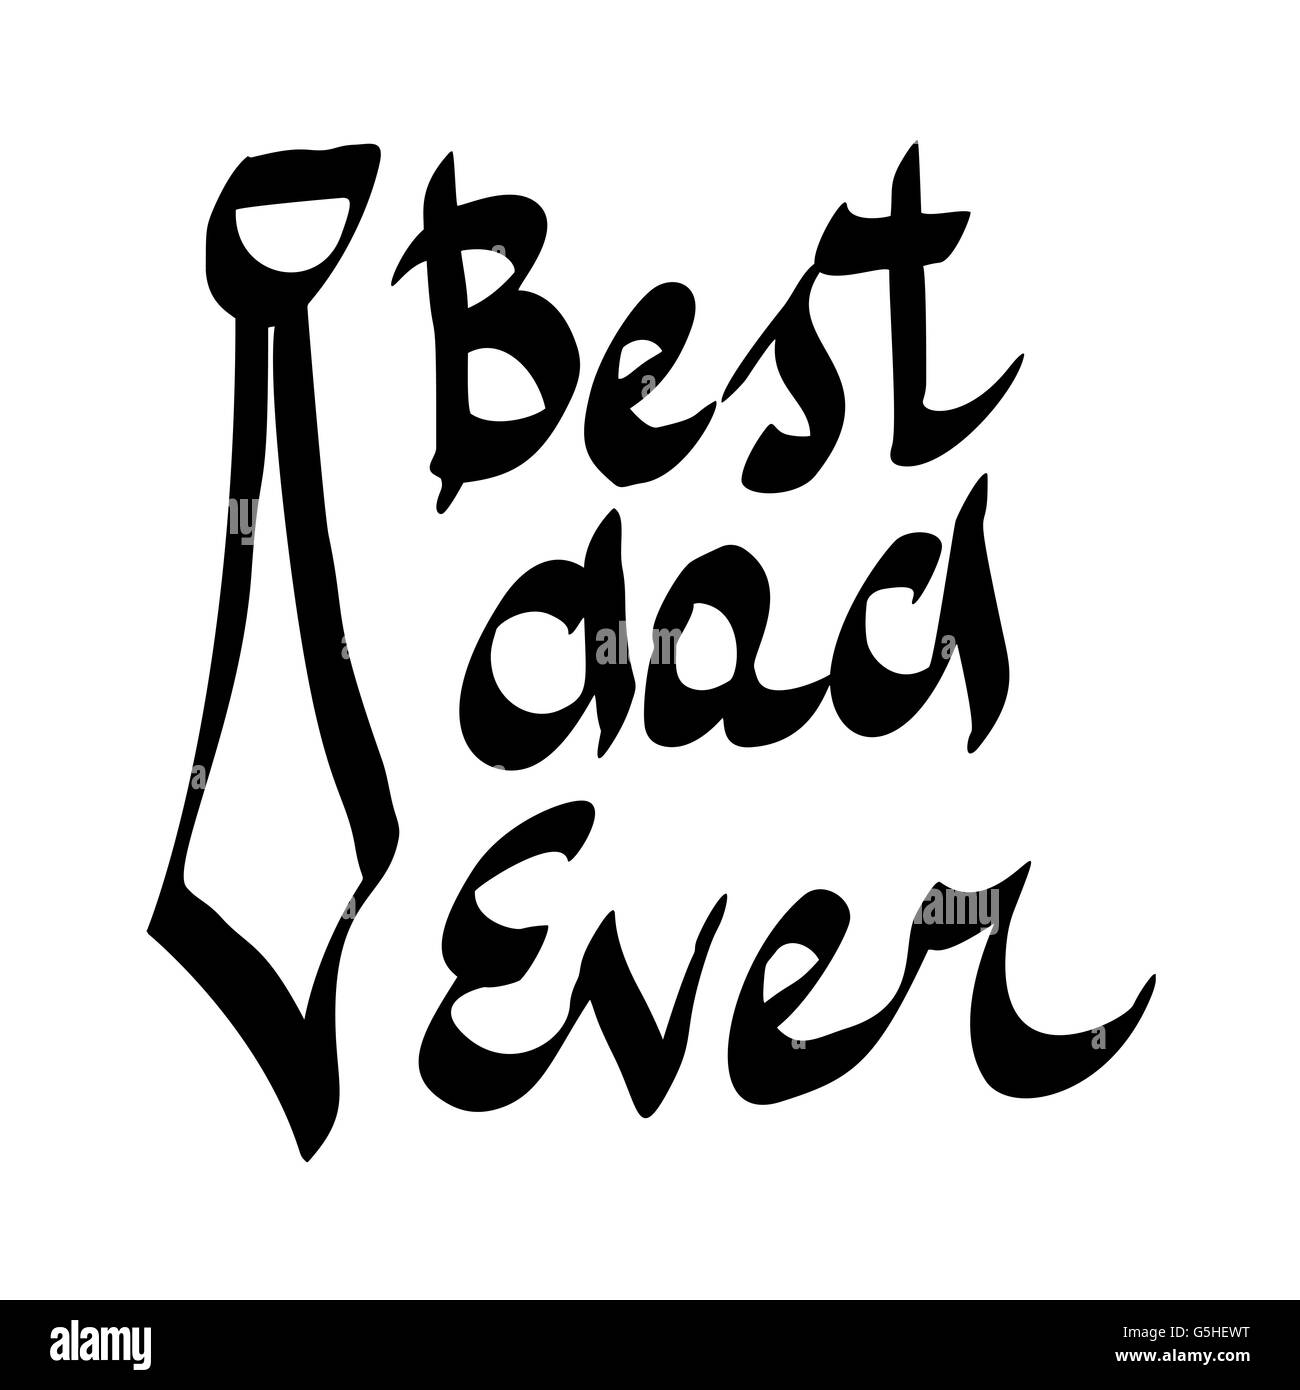 Best Dad Ever. hand-written lettering, t-shirt print design, typographic composition isolated on white background. Stock Photo